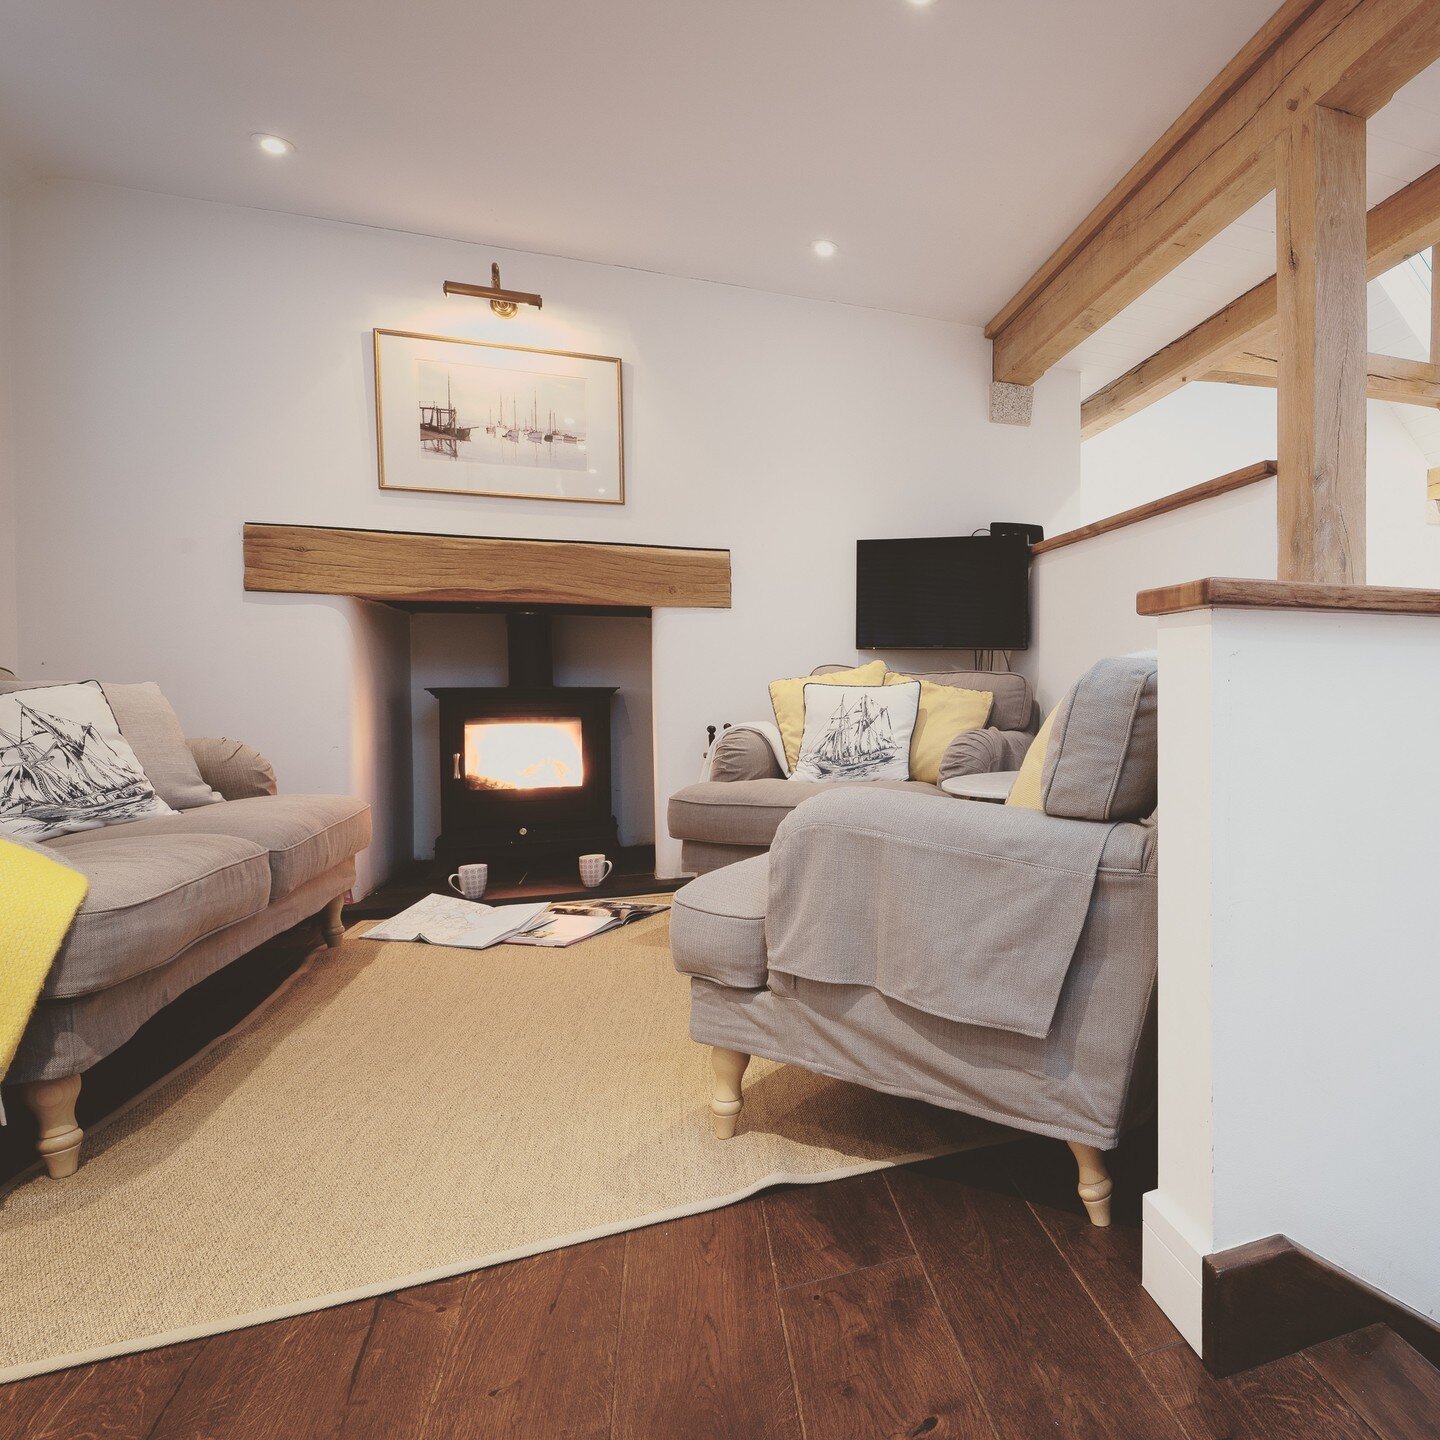 Crazy I know to be thinking about lighting log burners and snuggling up in the warmth but we are looking ahead here @daphnecottage as the cottage is generally full 6 months into the future. ⁠
🔥🔥🔥⁠
So if you are escaping the sun outside today and t